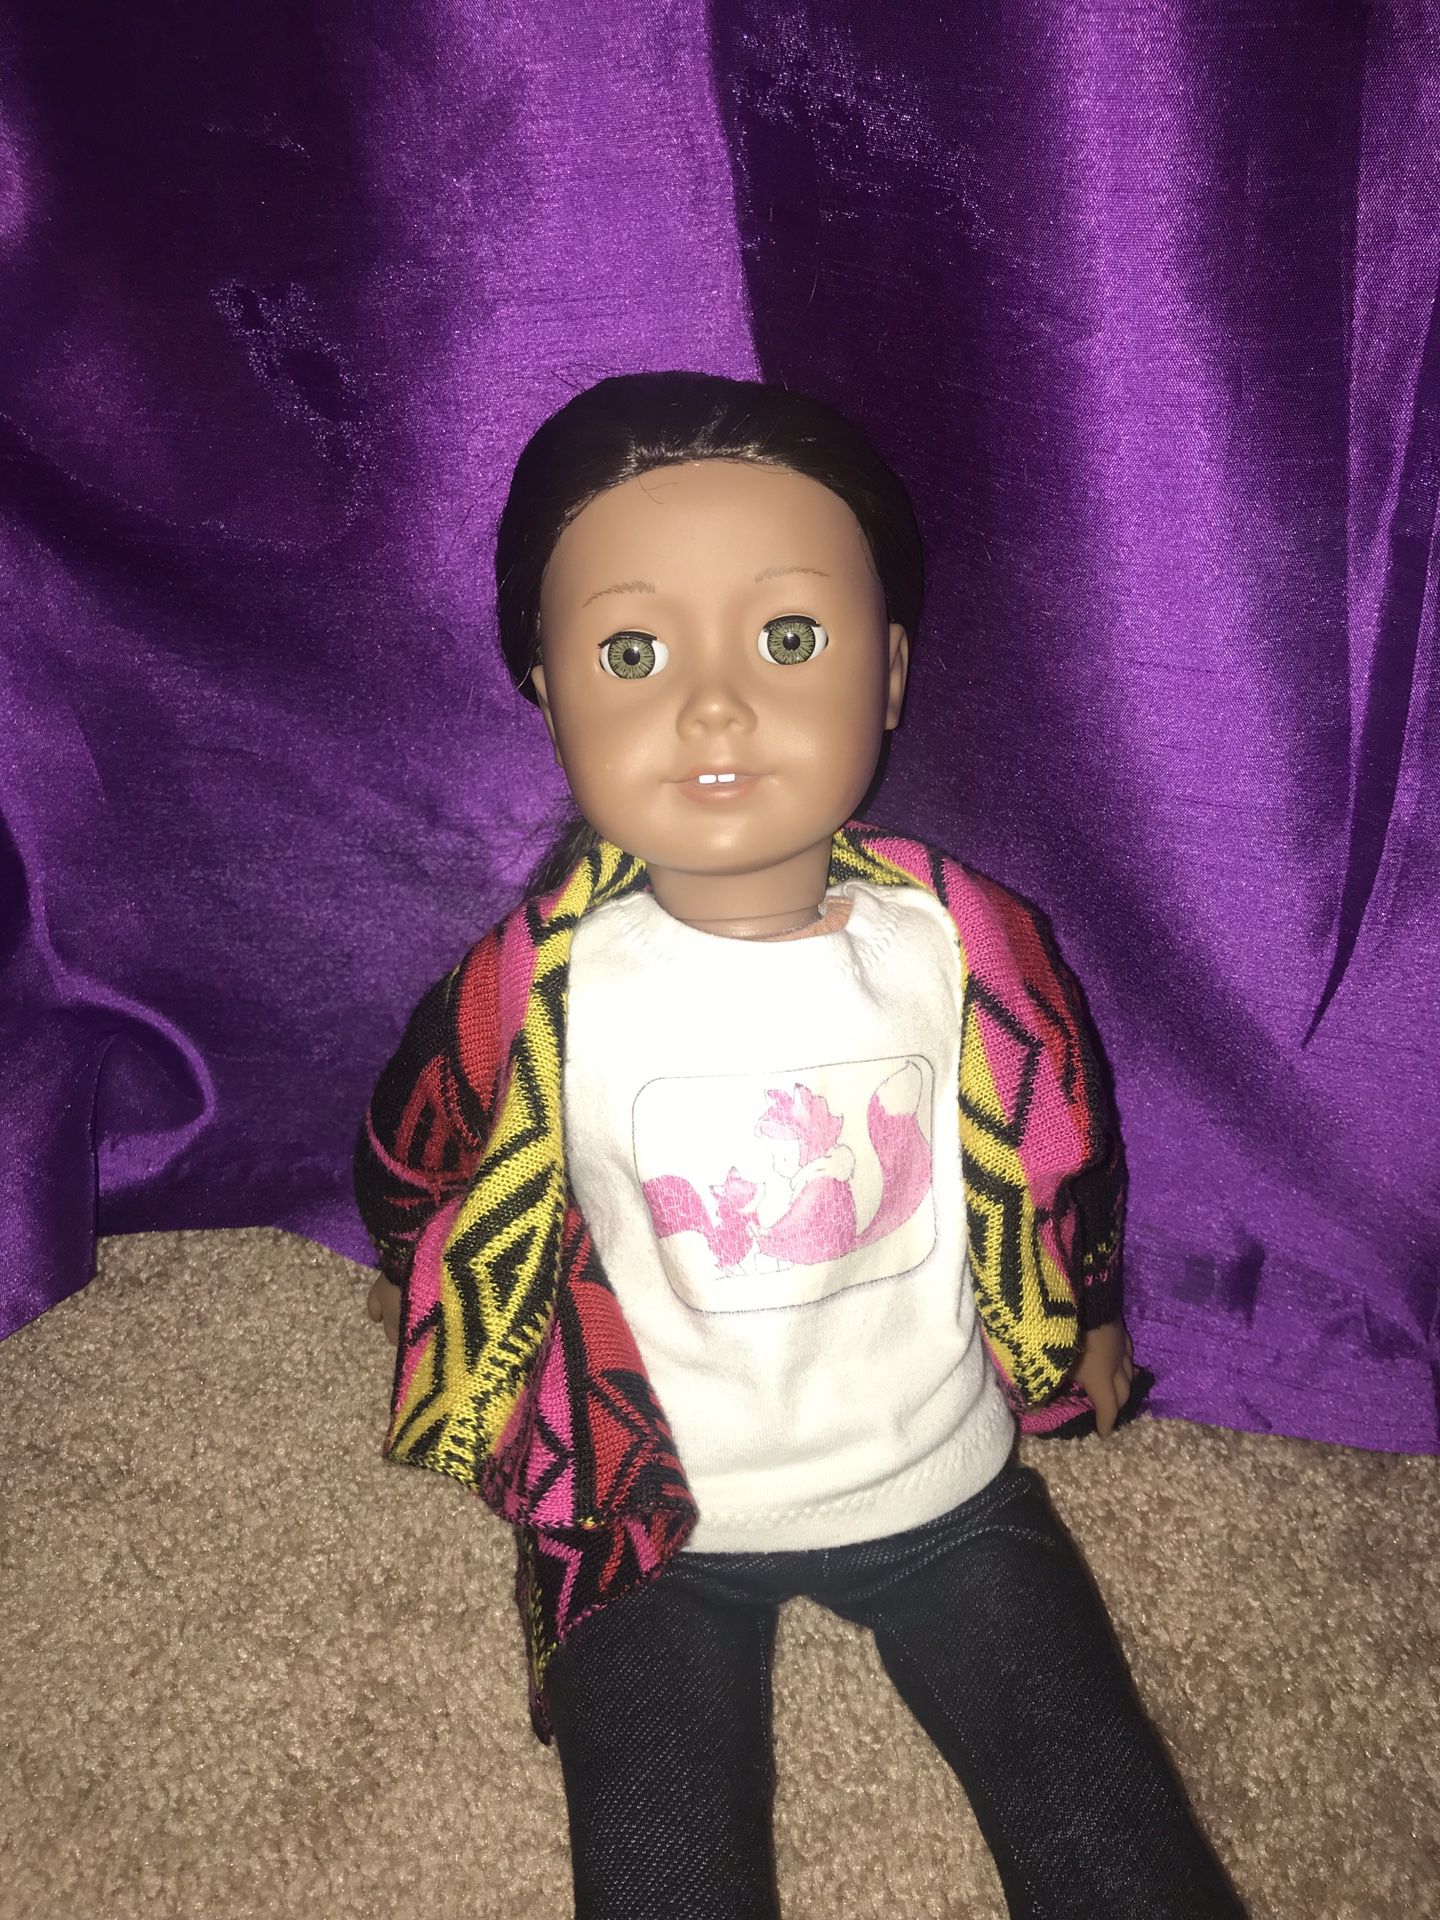 American girl doll and Accessories all for $100